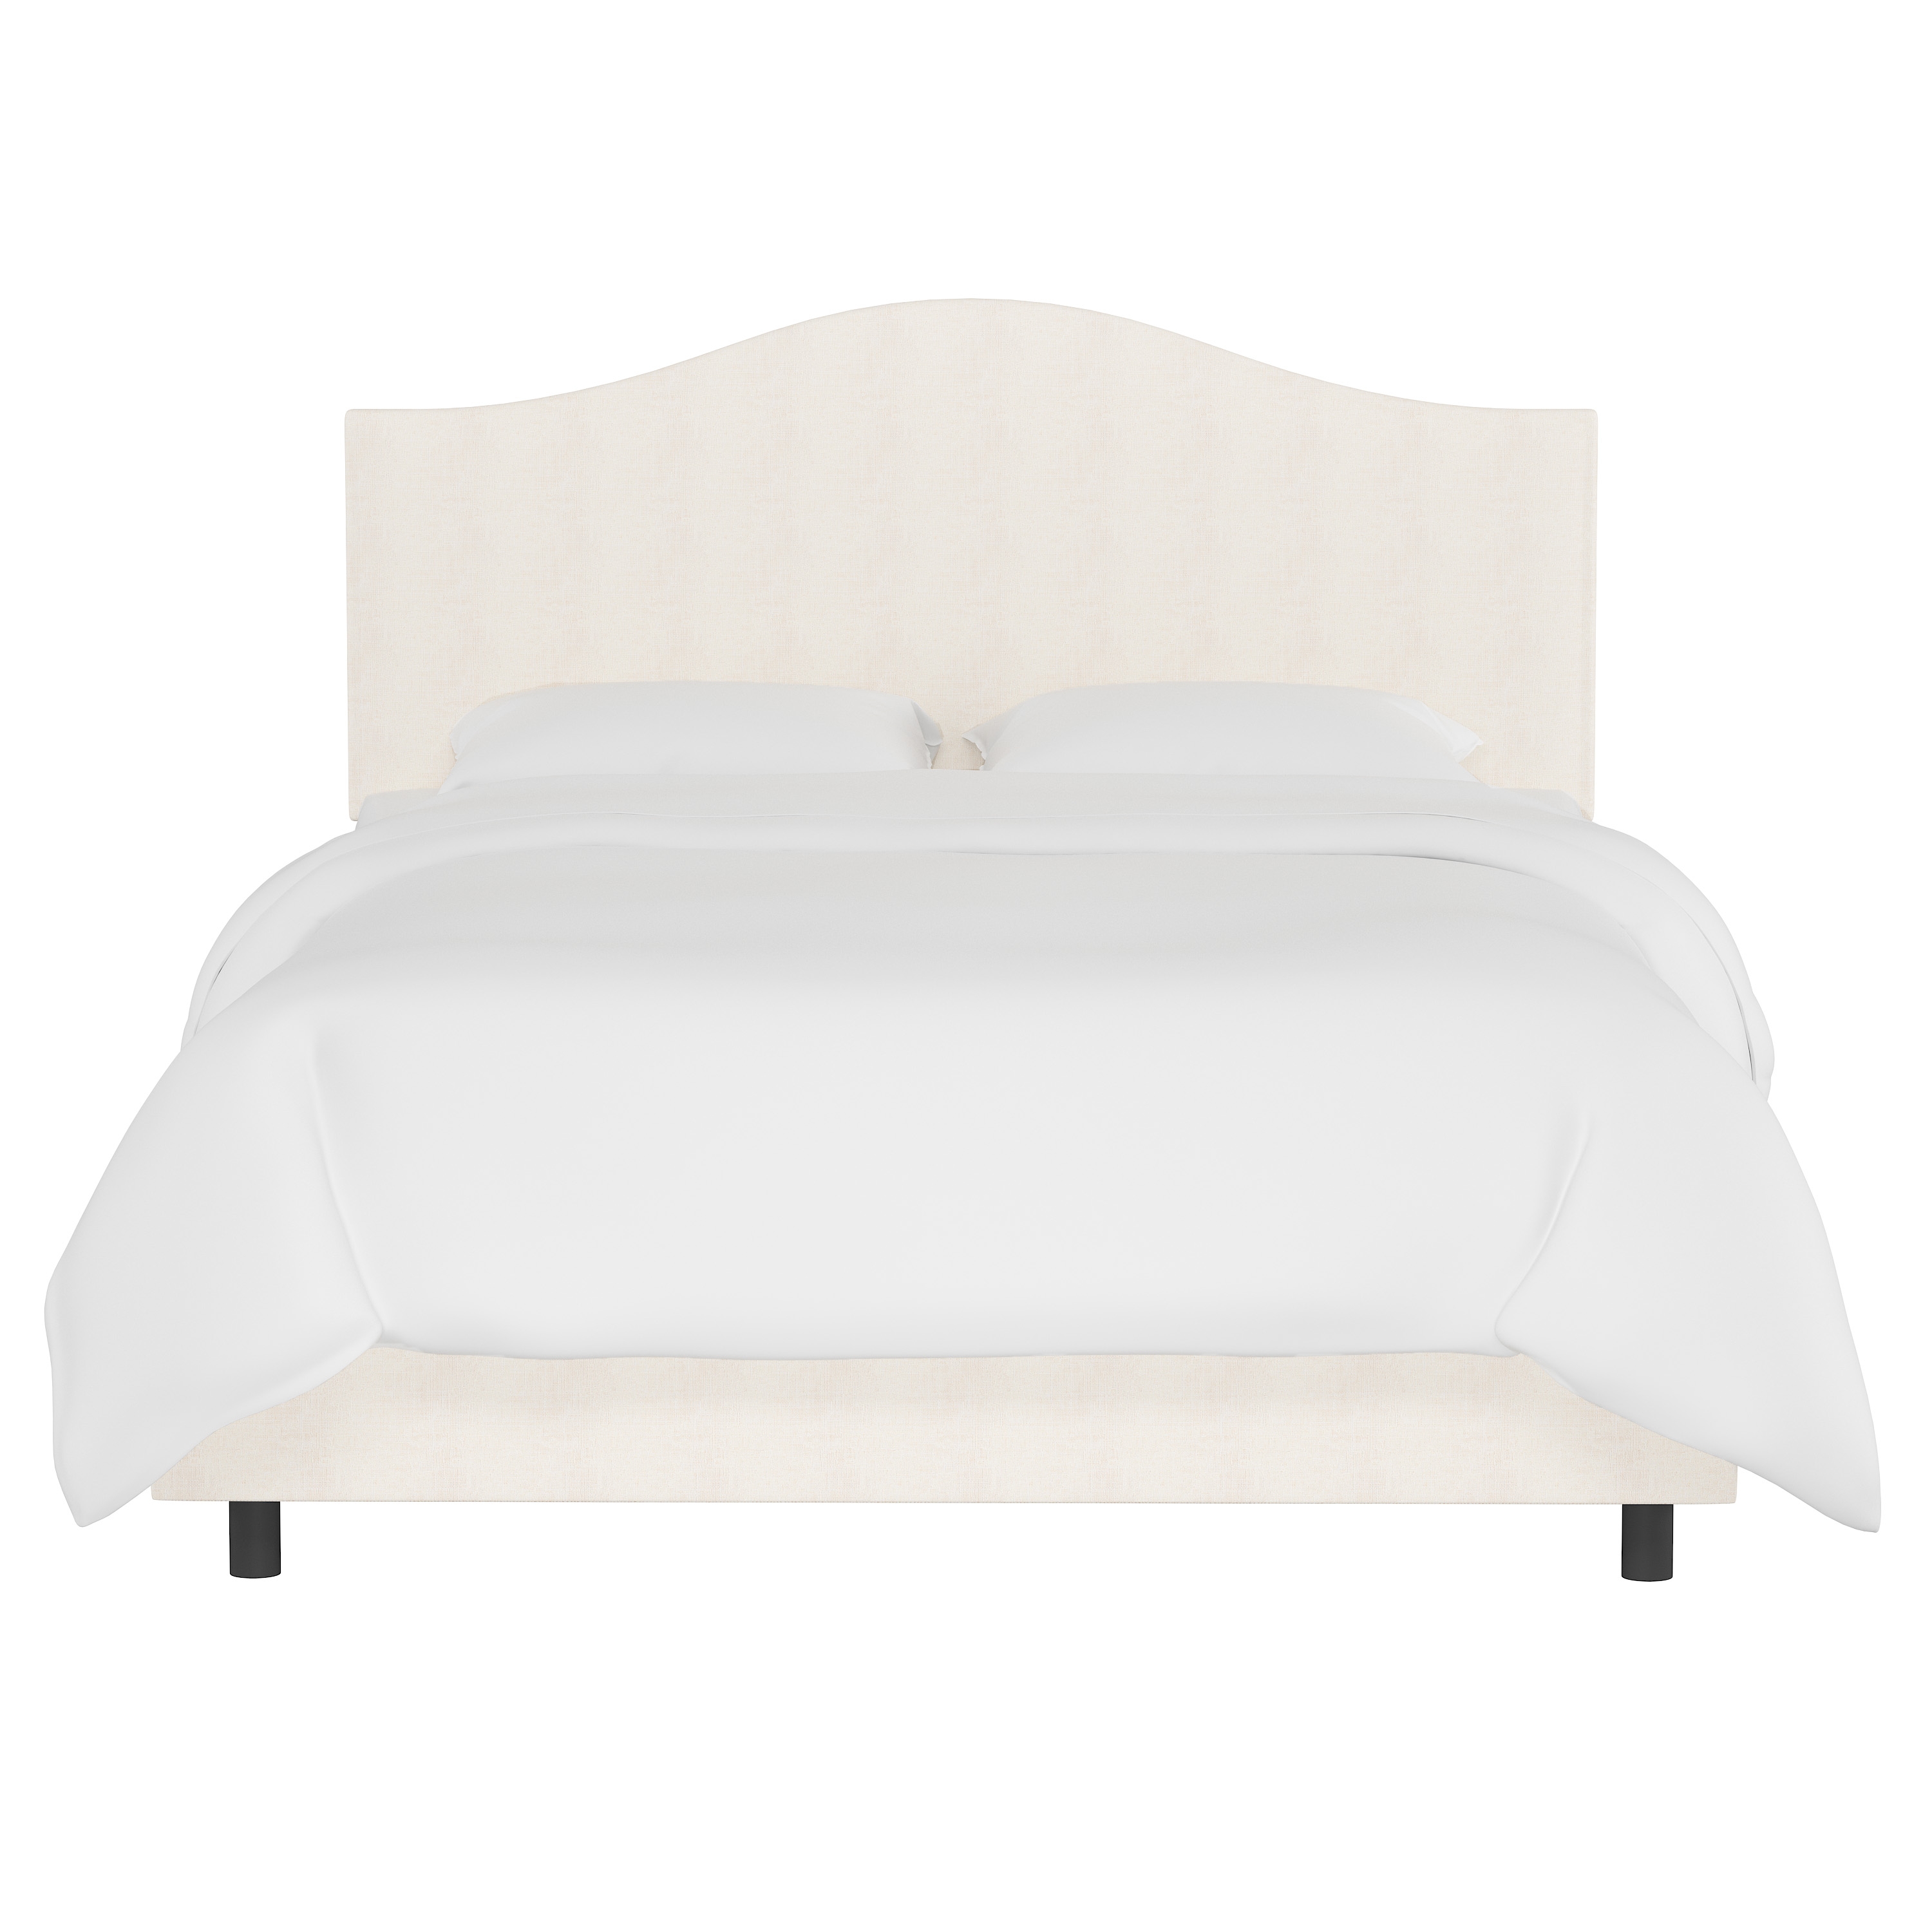 King Kenmore Bed in Zuma White - Image 1